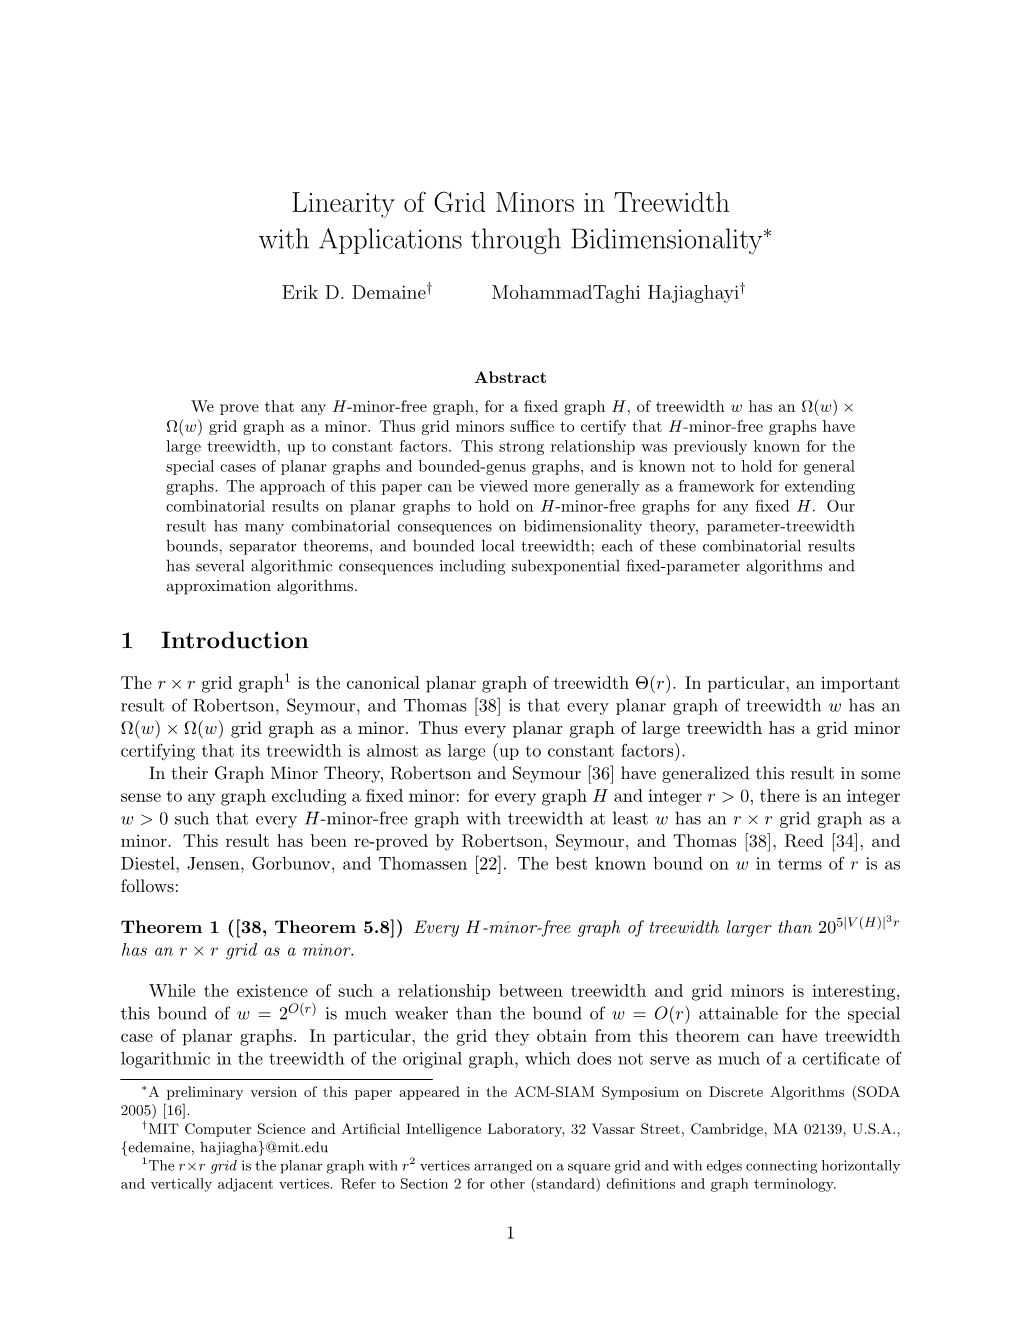 Linearity of Grid Minors in Treewidth with Applications Through Bidimensionality∗